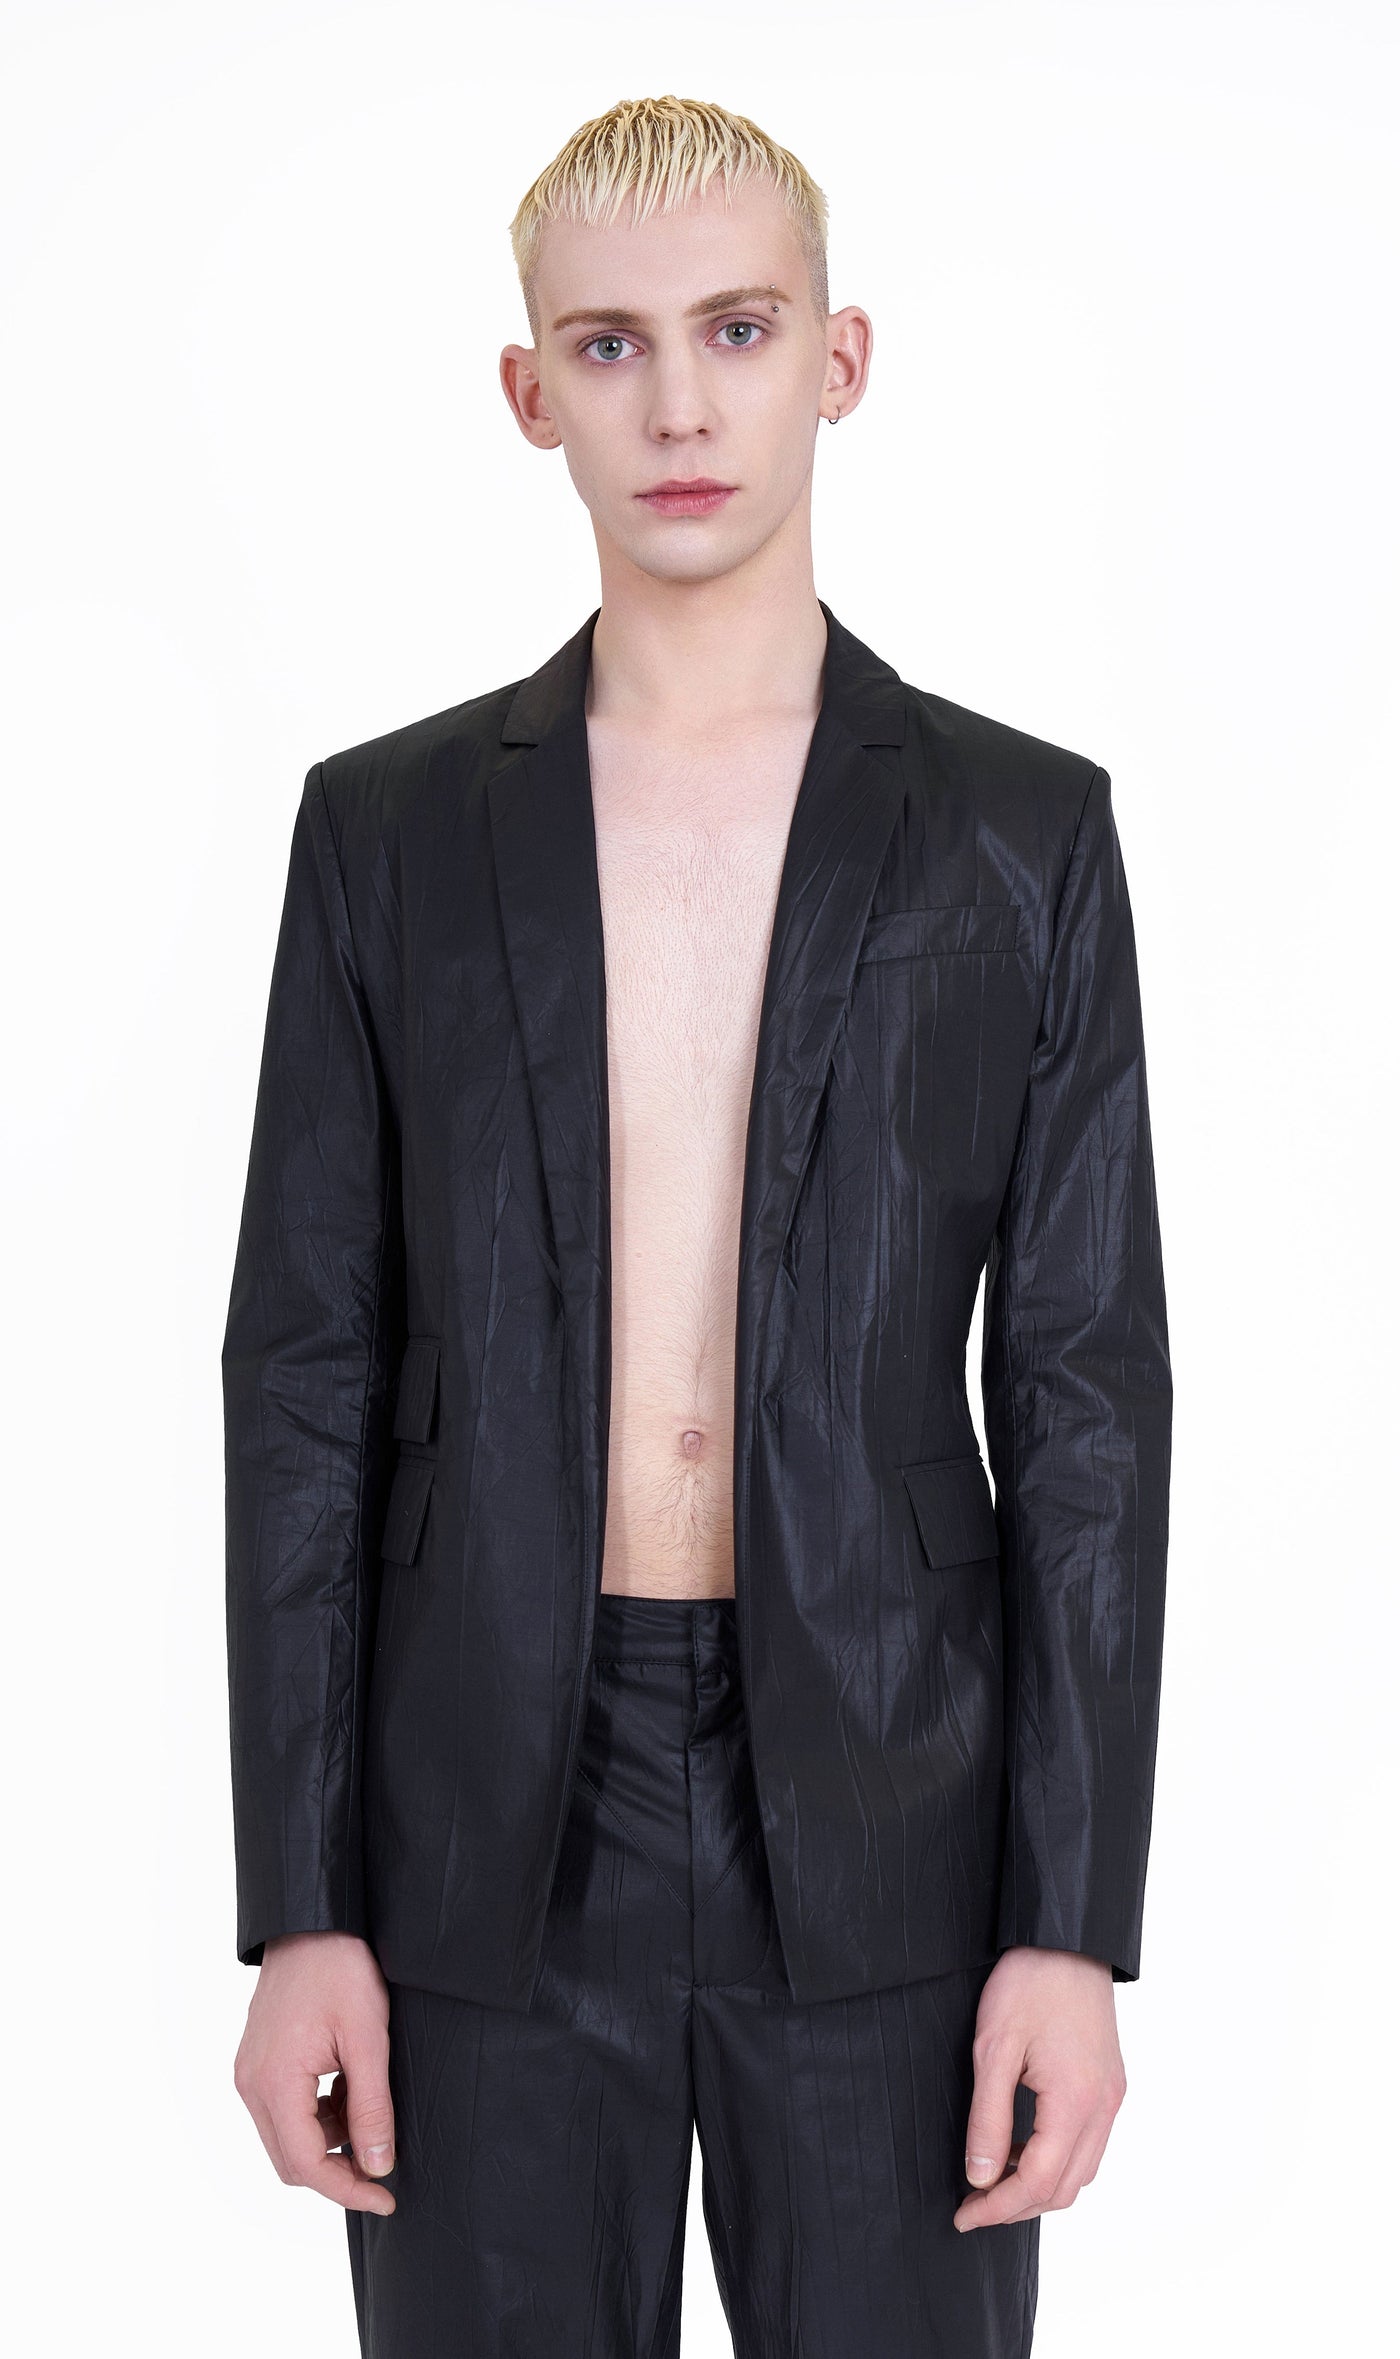 CLASH TAILORED JACKET / LIMITED EDITION